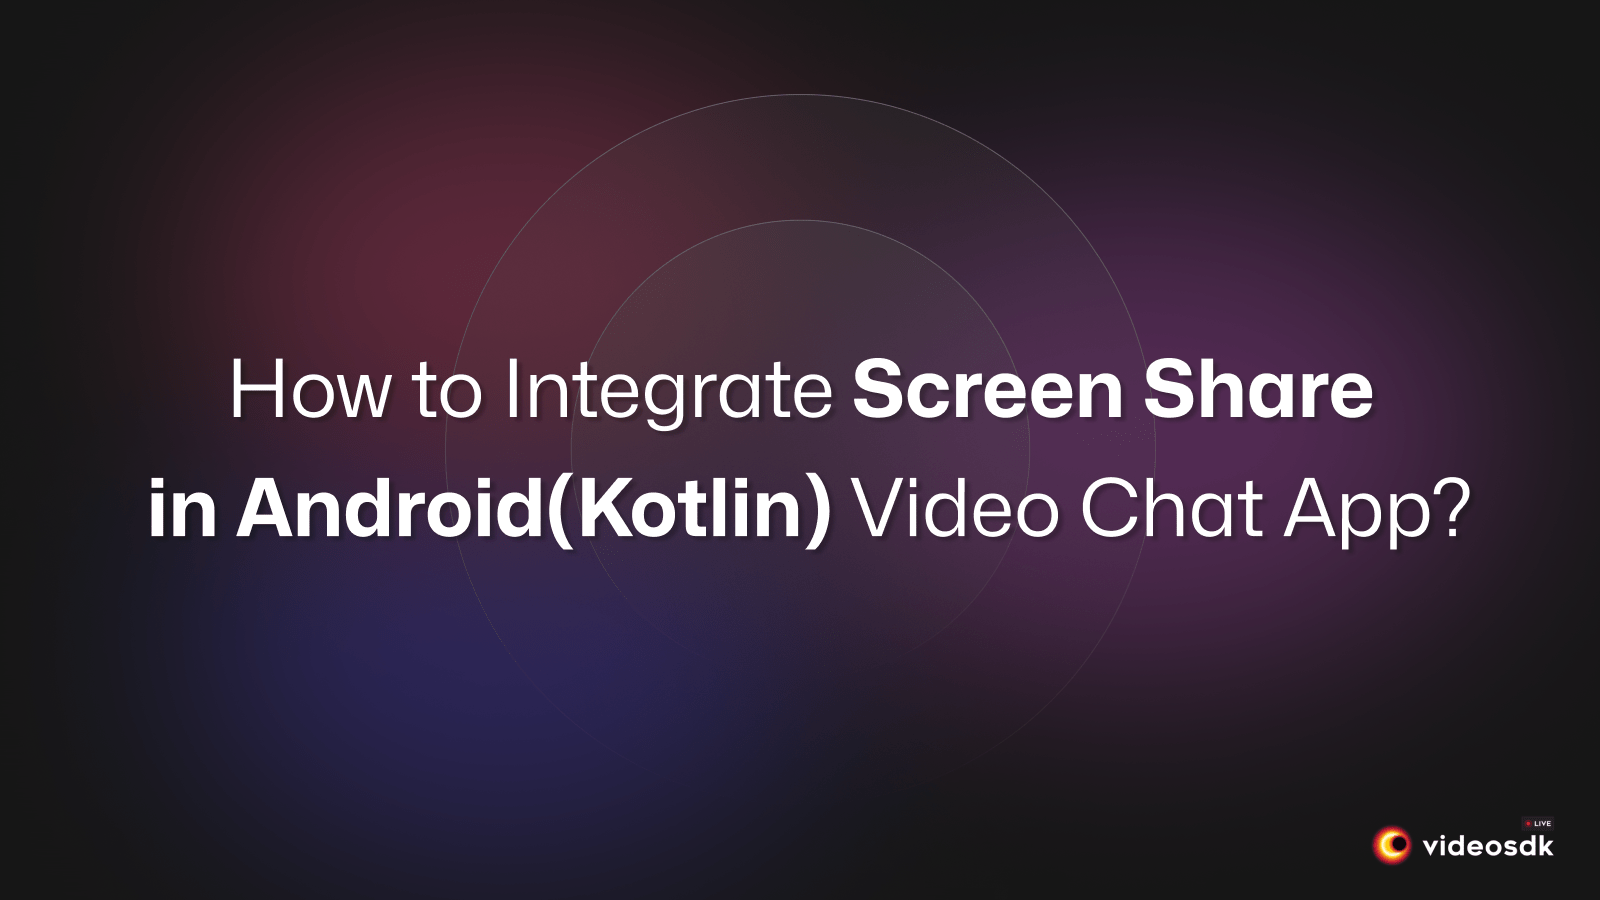 How to Integrate Screen Share in Android(Kotlin) Video Chat App?